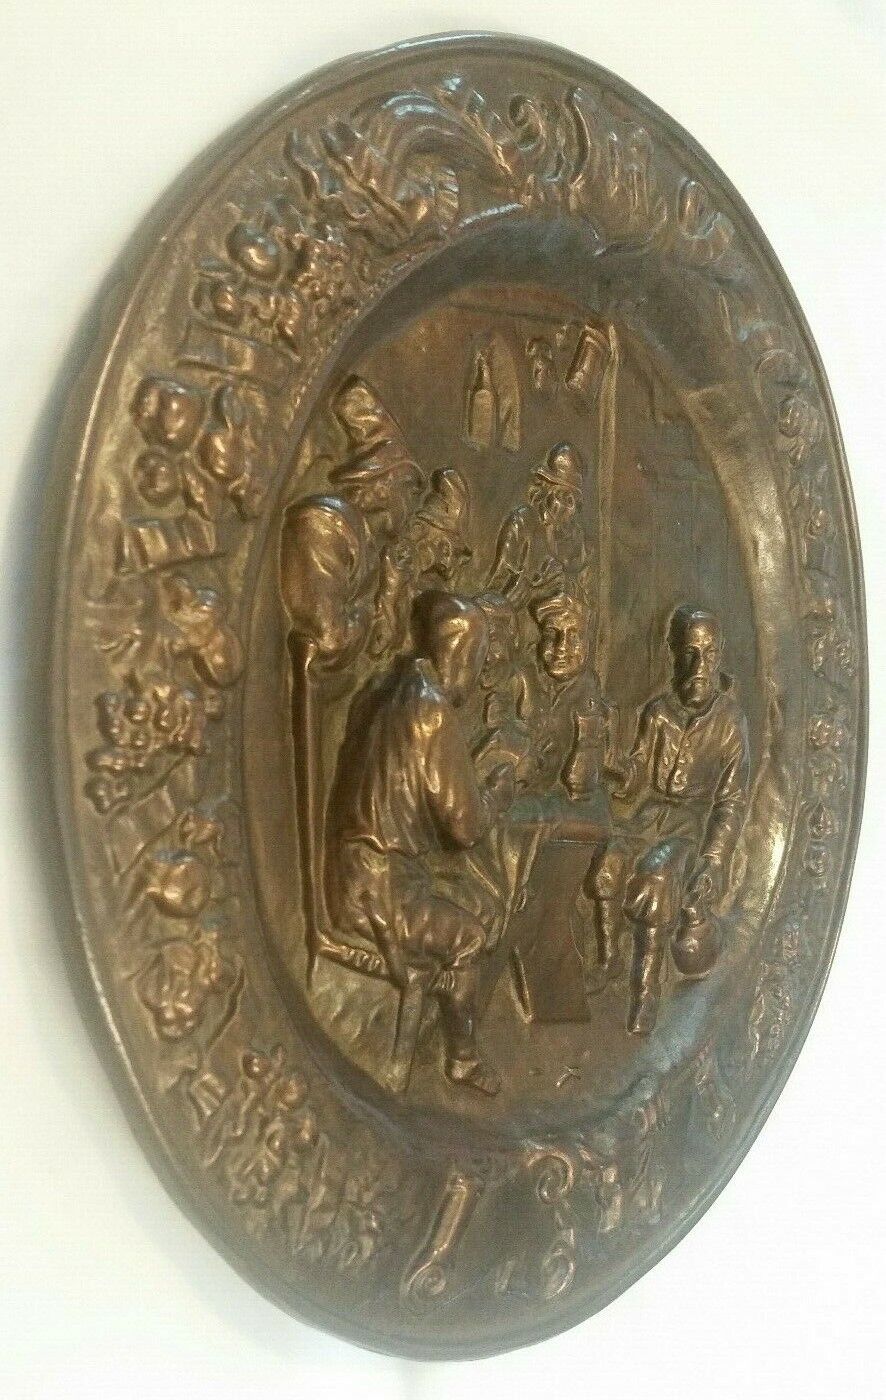 Antique Bronze Charger Plate with High Relief Scene 13.25